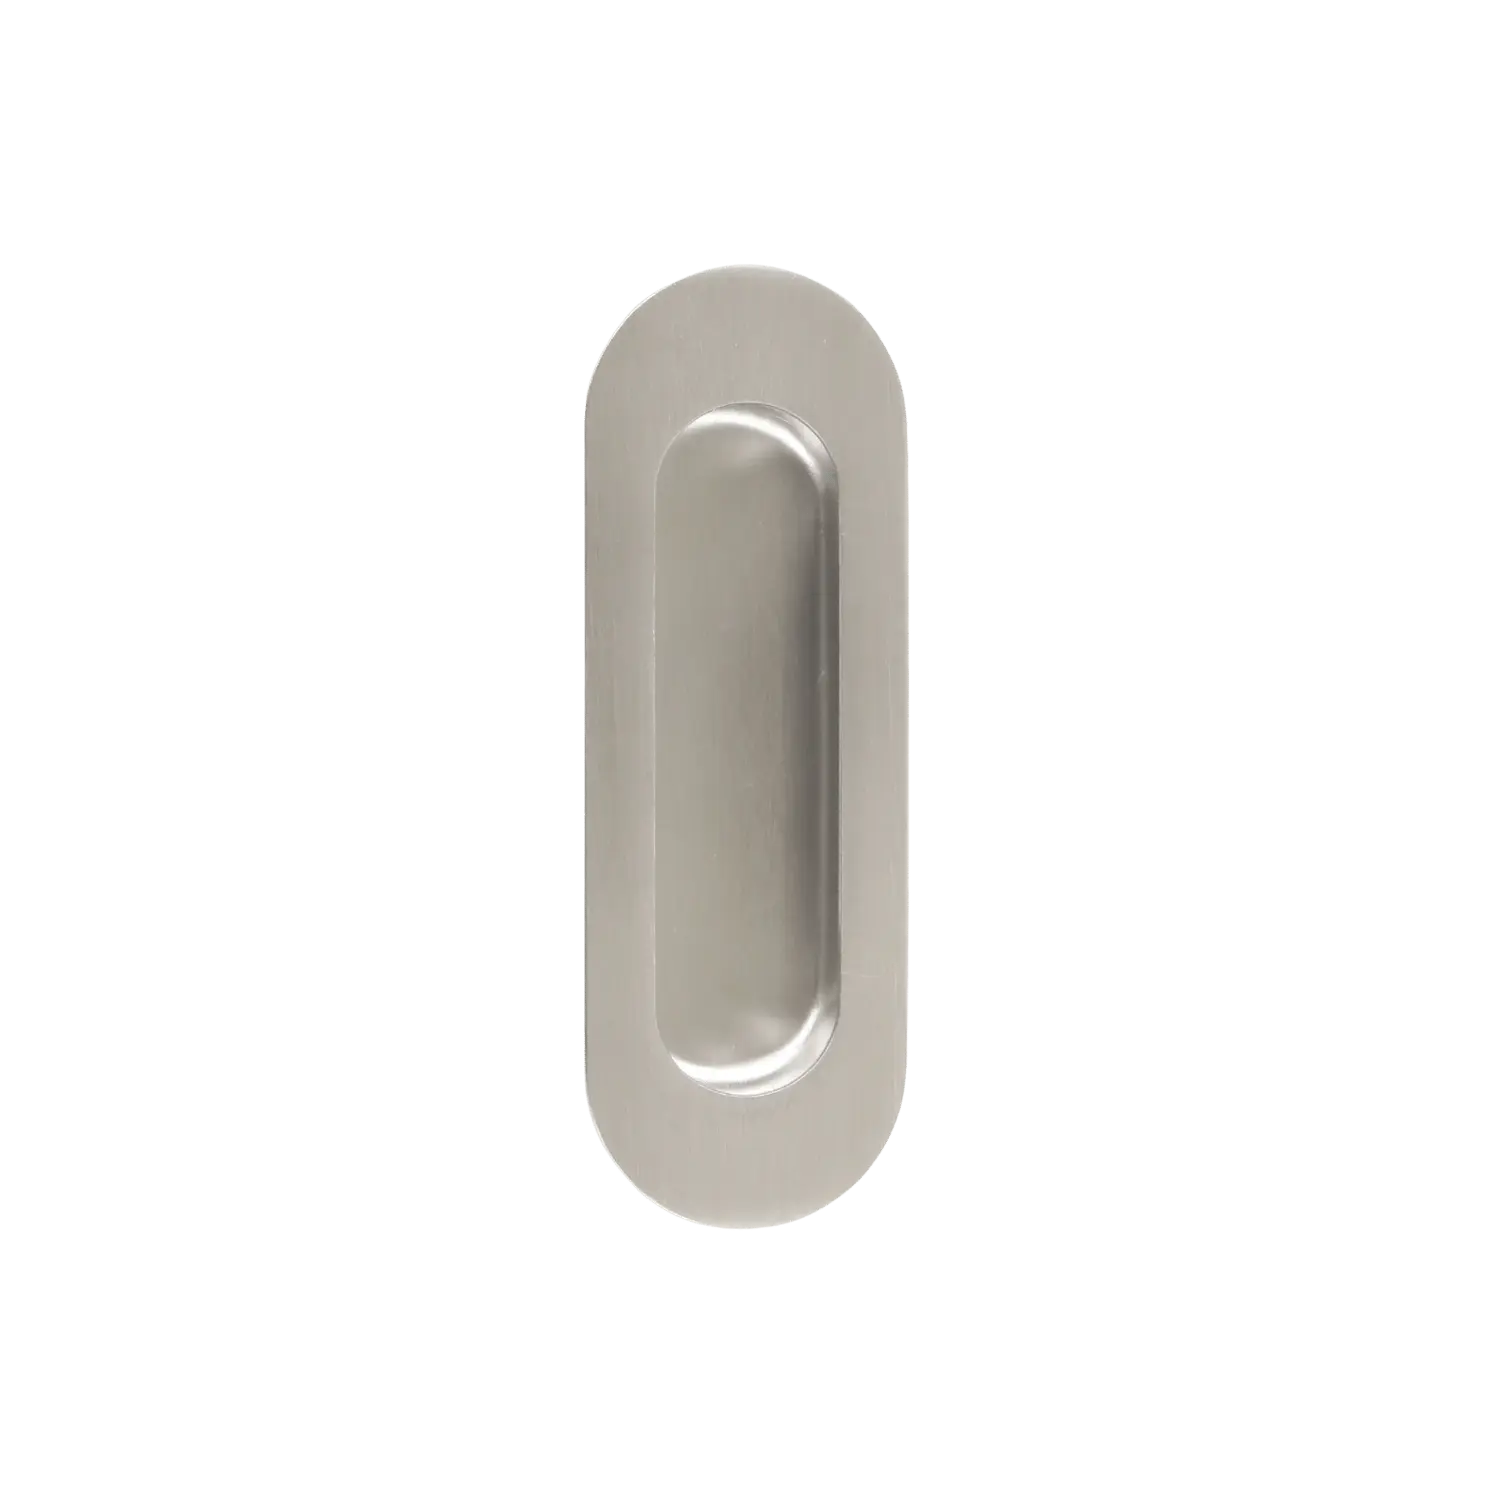 Coquille d'encastrement Ovale Aveugle 120x40mm Inox